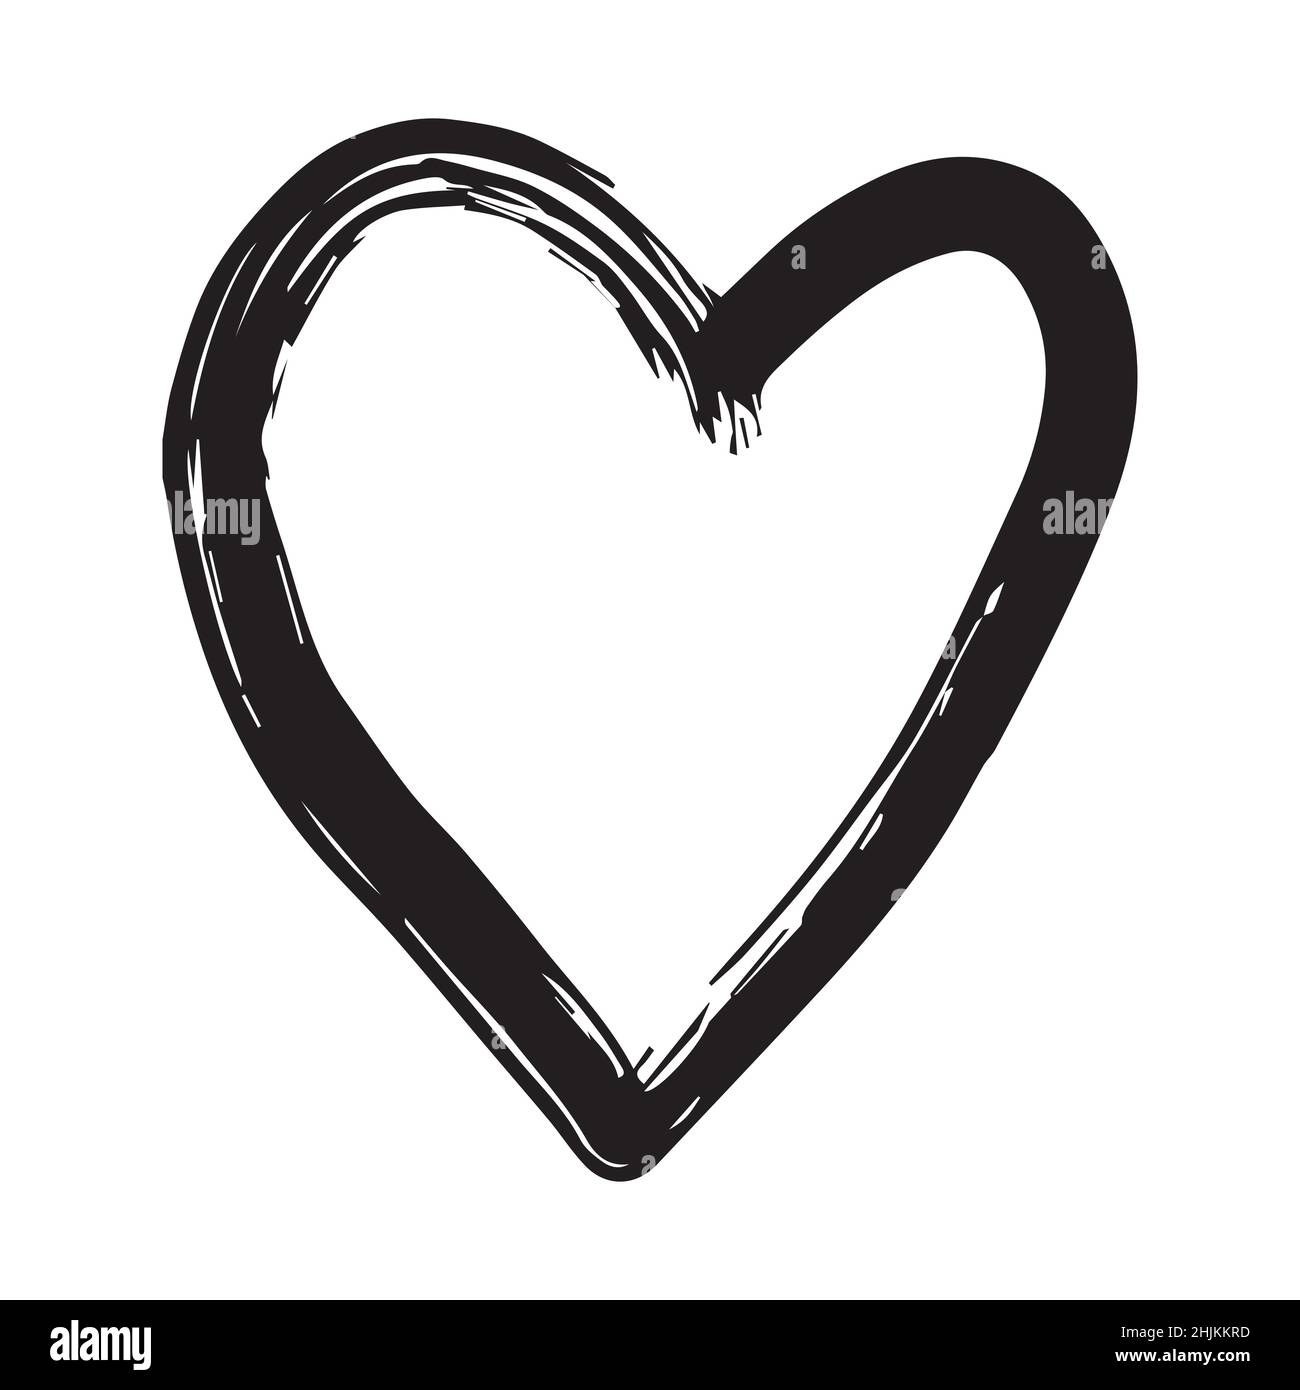 Hearts High-Res Vector Graphic - Getty Images